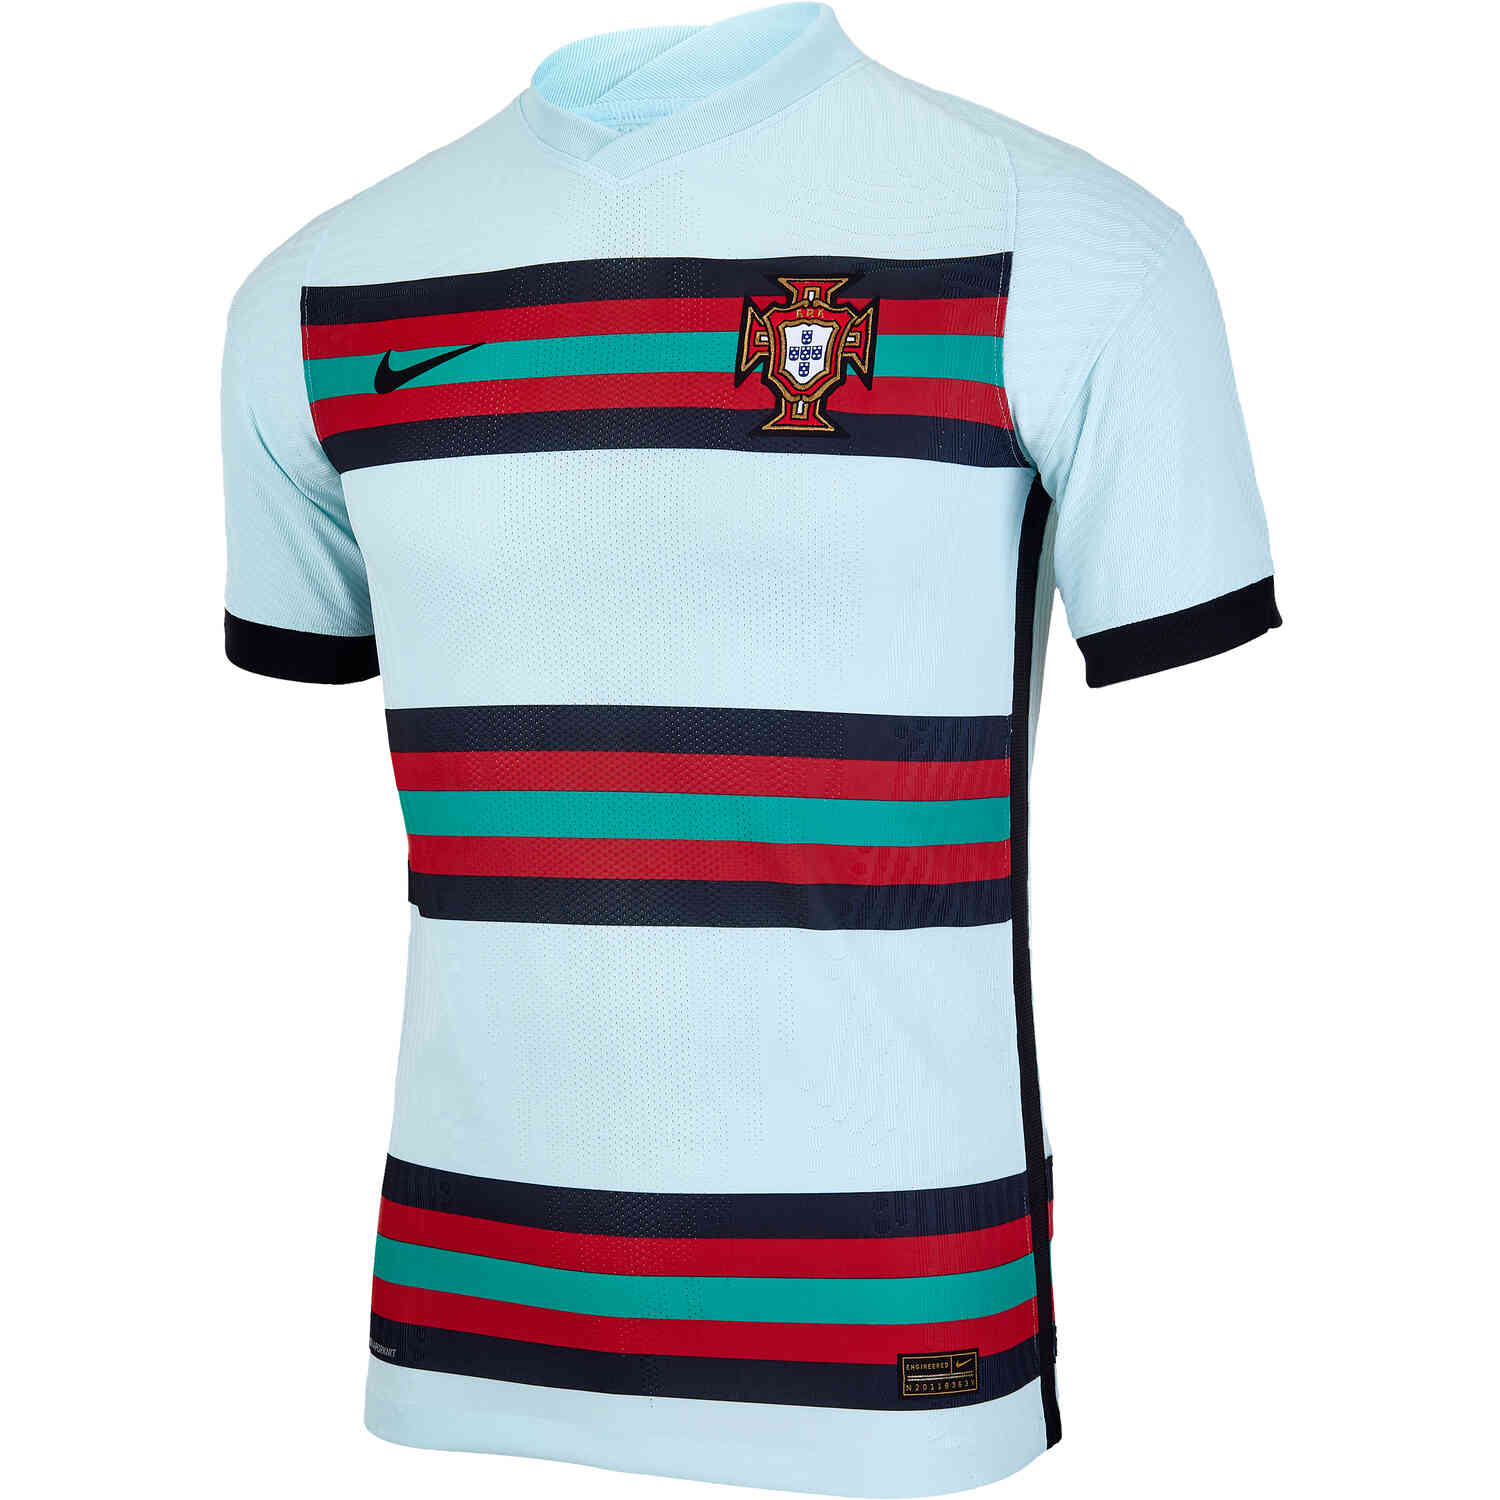 Soccer Jersey W/ Gucci Color-way Portugal Pepe #3